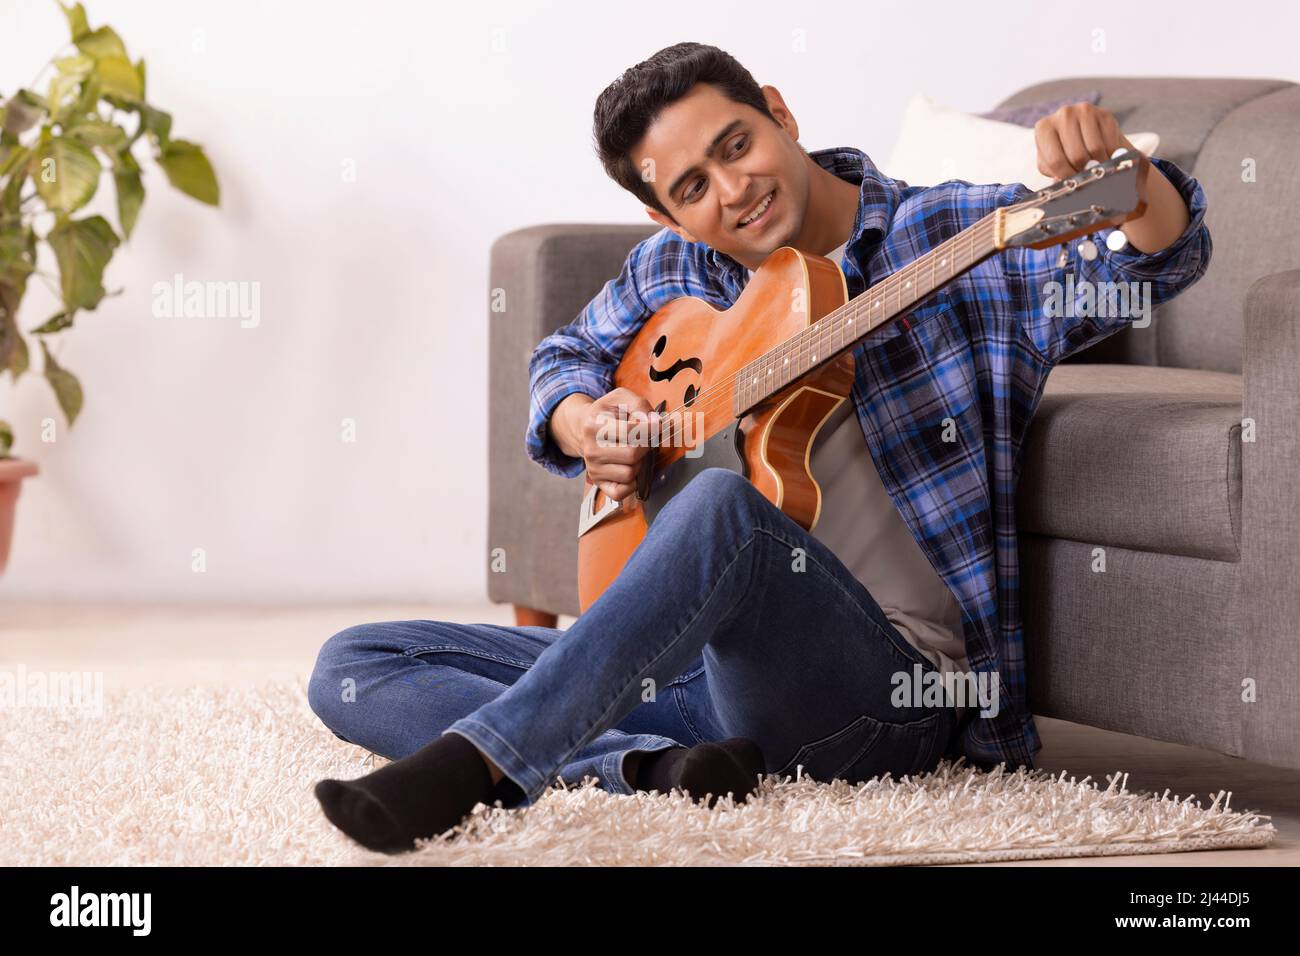 Portrait of a young musician tuning guitar in living room Stock Photo